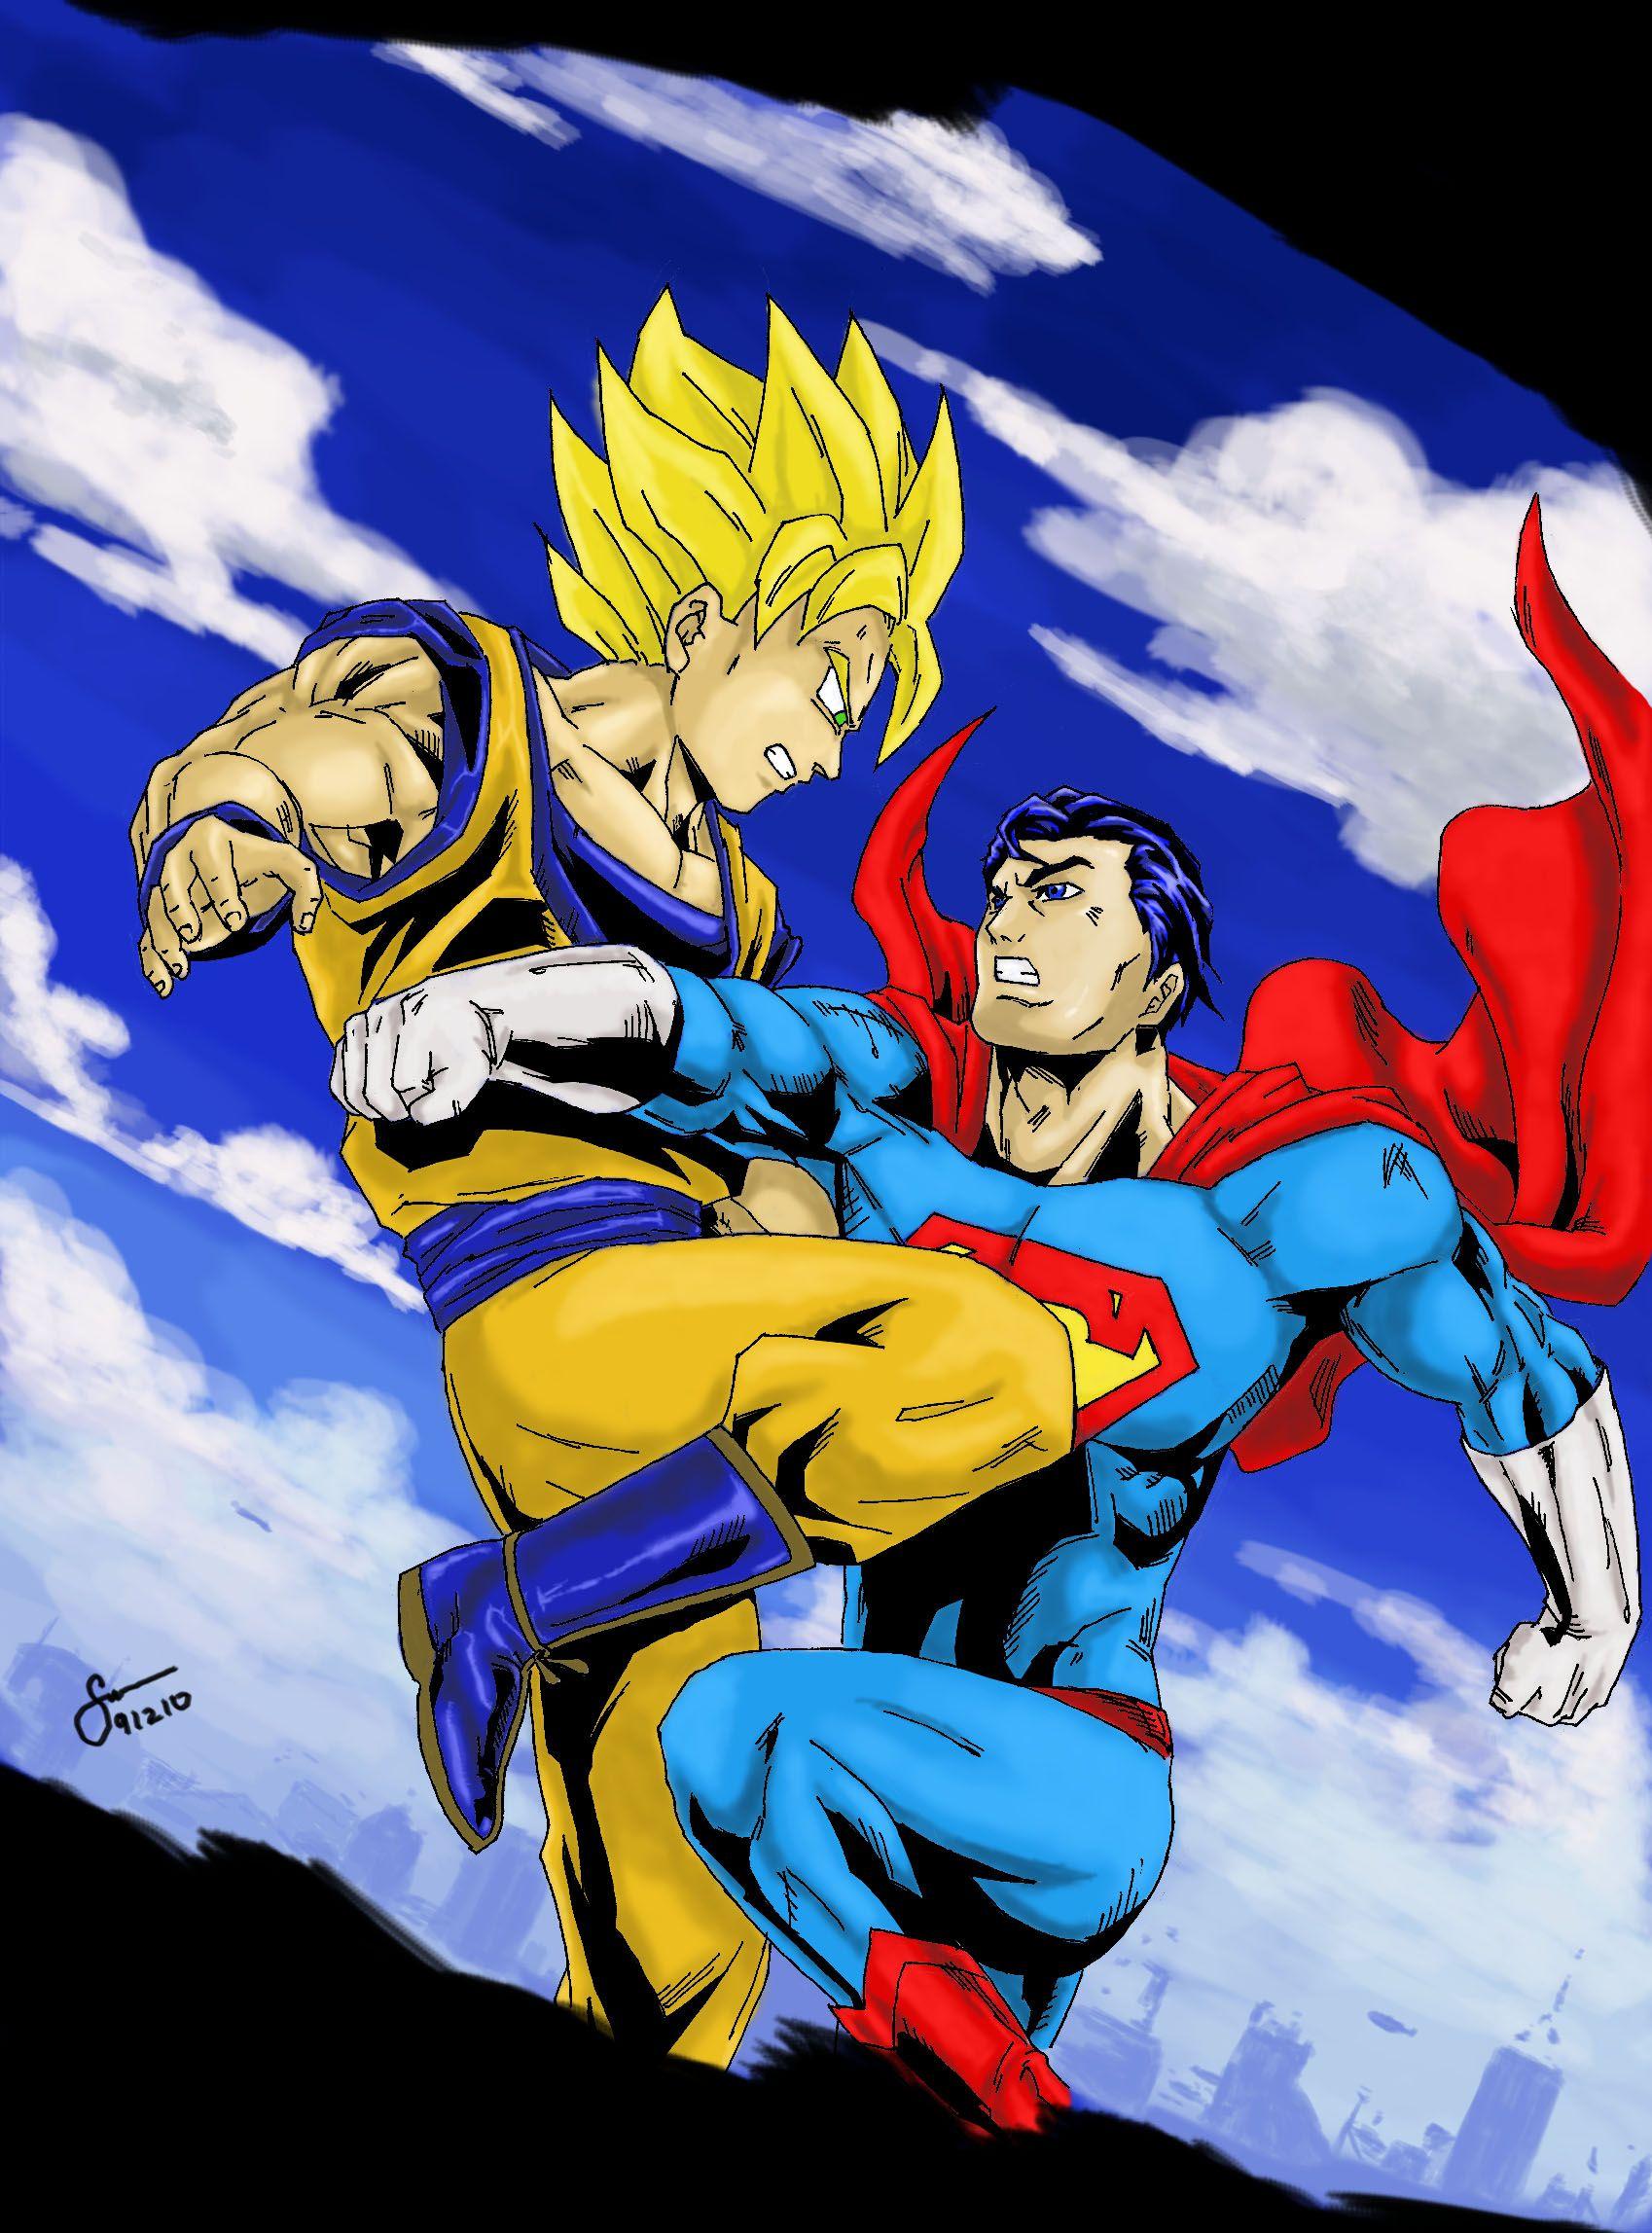 Why is goku vs superman such a common matchup?-Topic